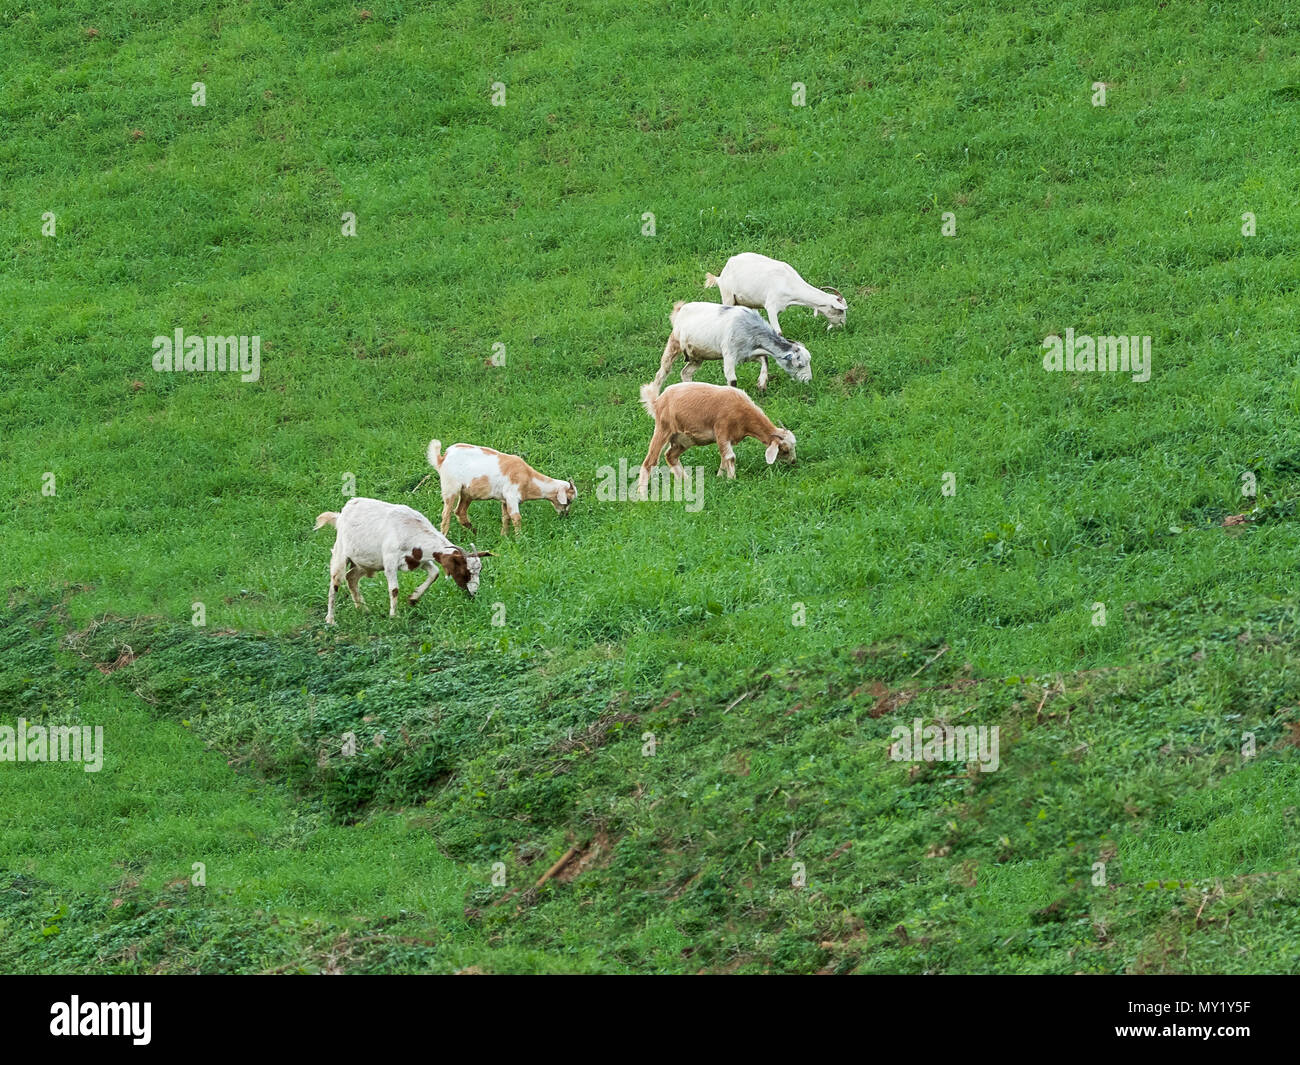 Aligned goats eating green grass with one leader ahead Stock Photo